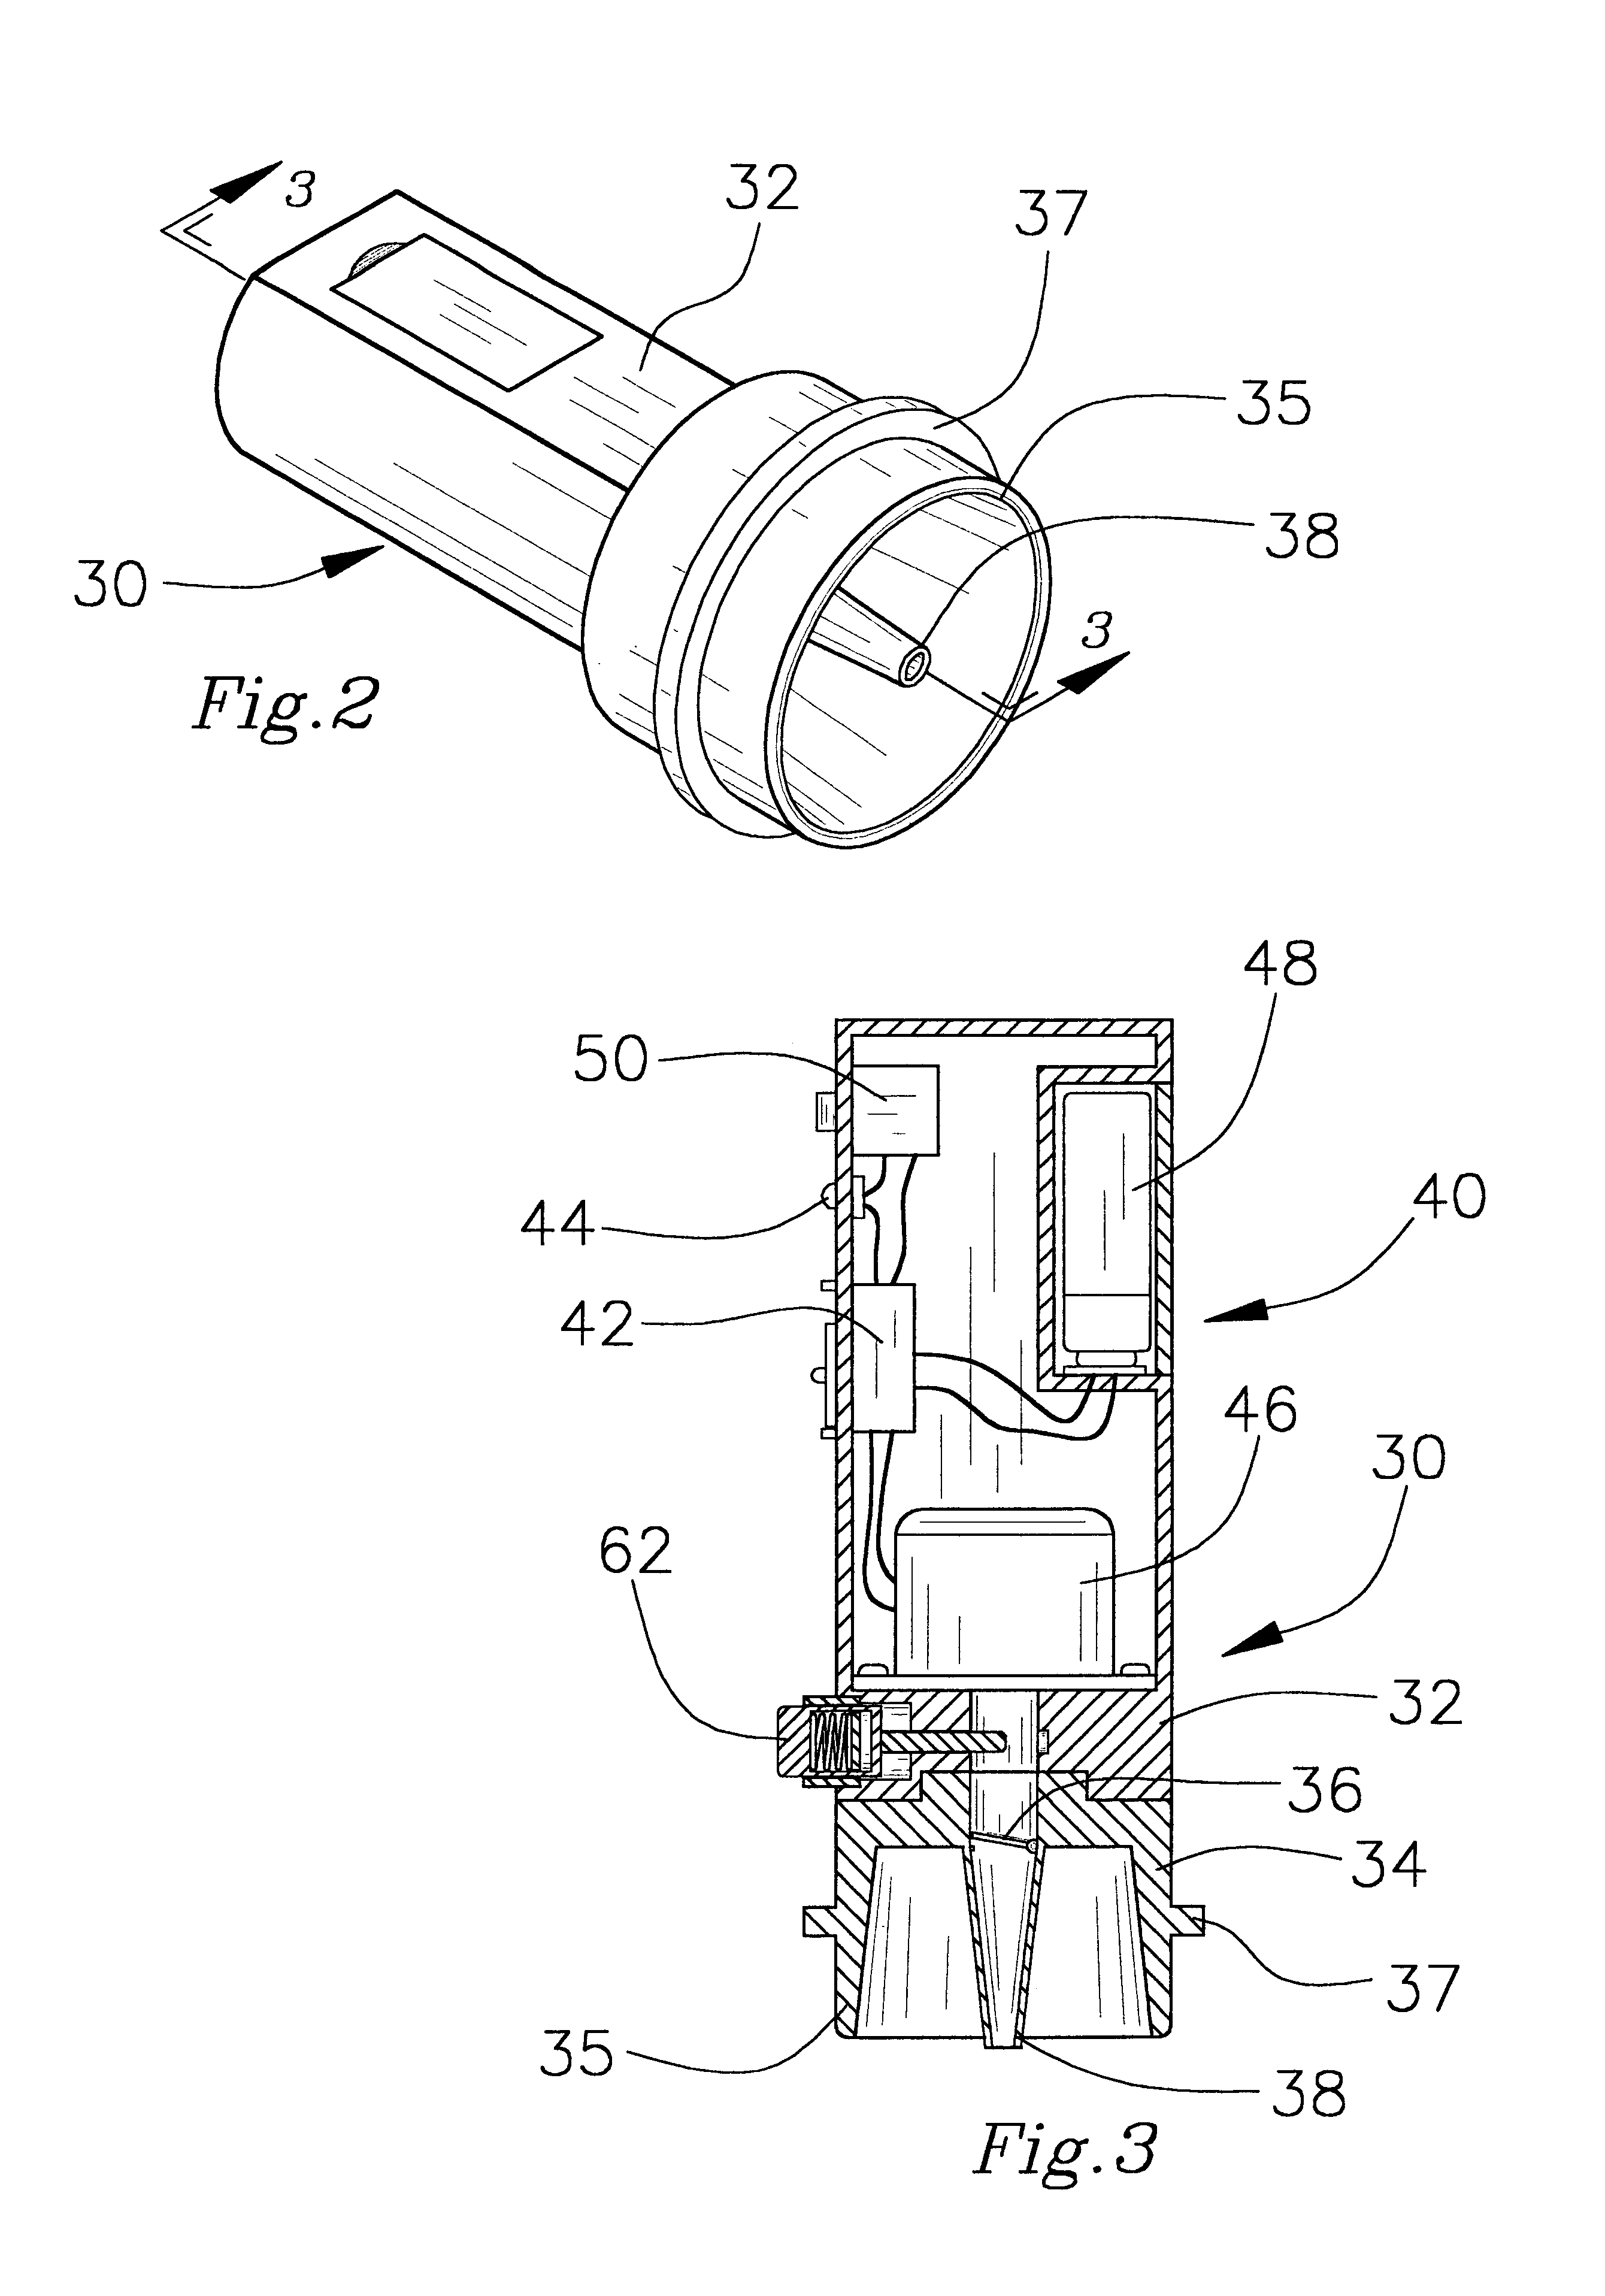 Apparatus for producing a hematoma